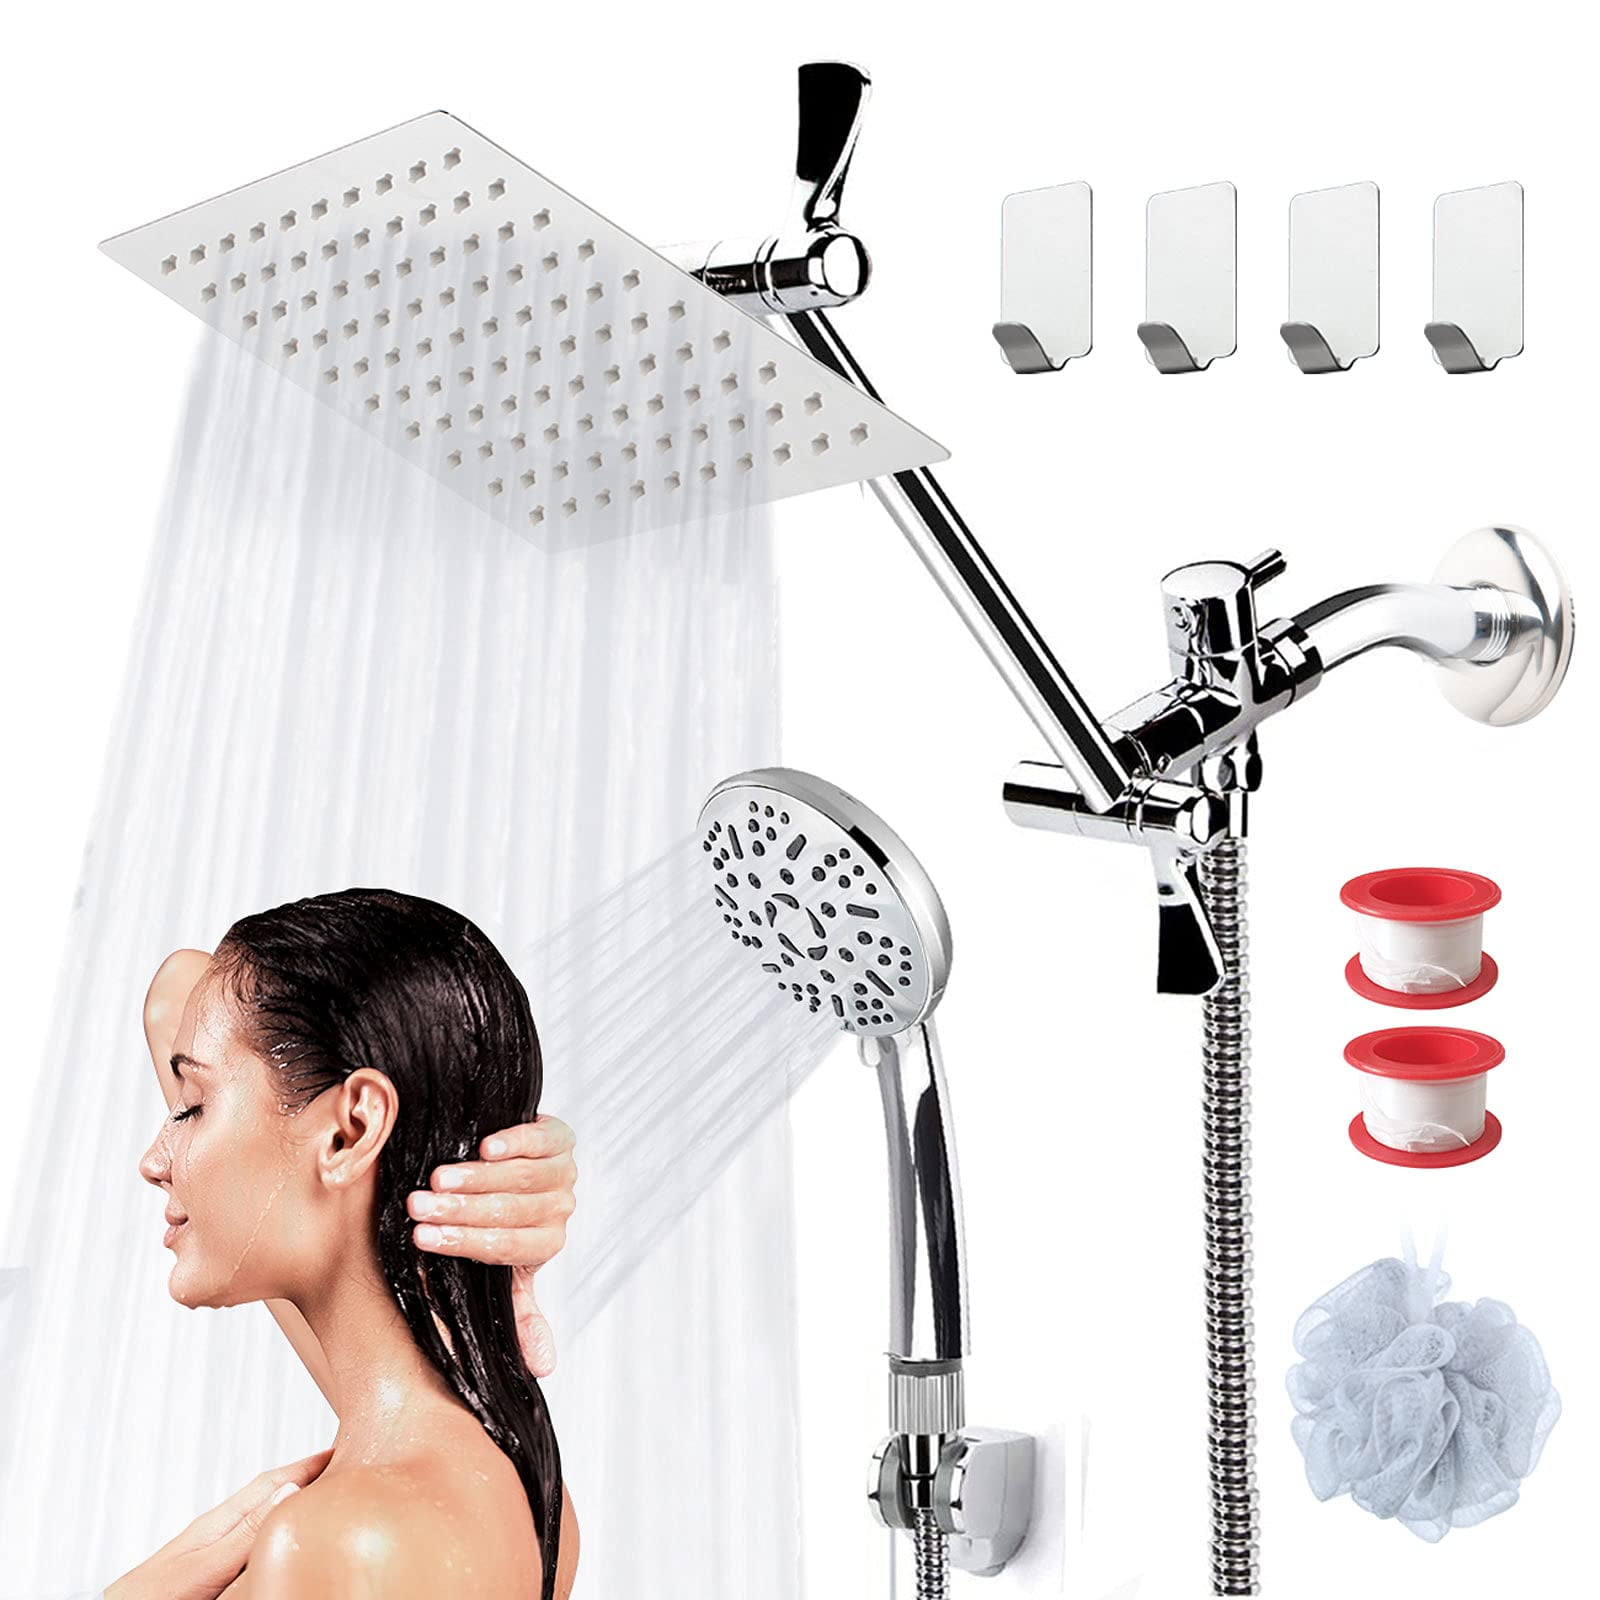 Height//Angle Adjustable Shower Head 10 Inch High Pressure Rainfall Shower Head//Handheld Shower Combo with 11 Inch Extension Arm Chrome 9 Settings Adjustable Anti-leak Shower Head with Holder//Hose